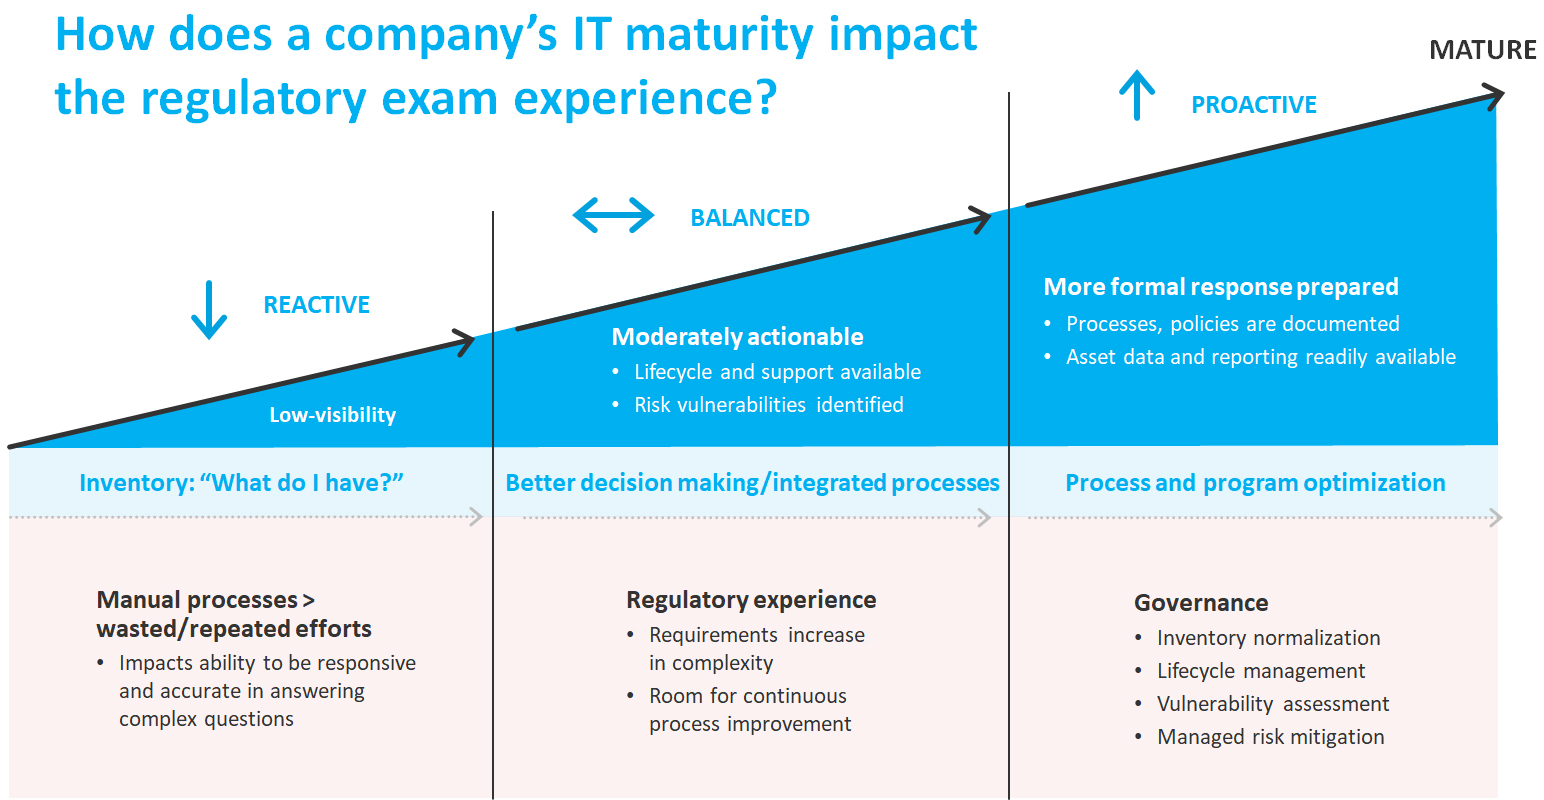 How does a company's IT maturity impact the regulatory exam experience